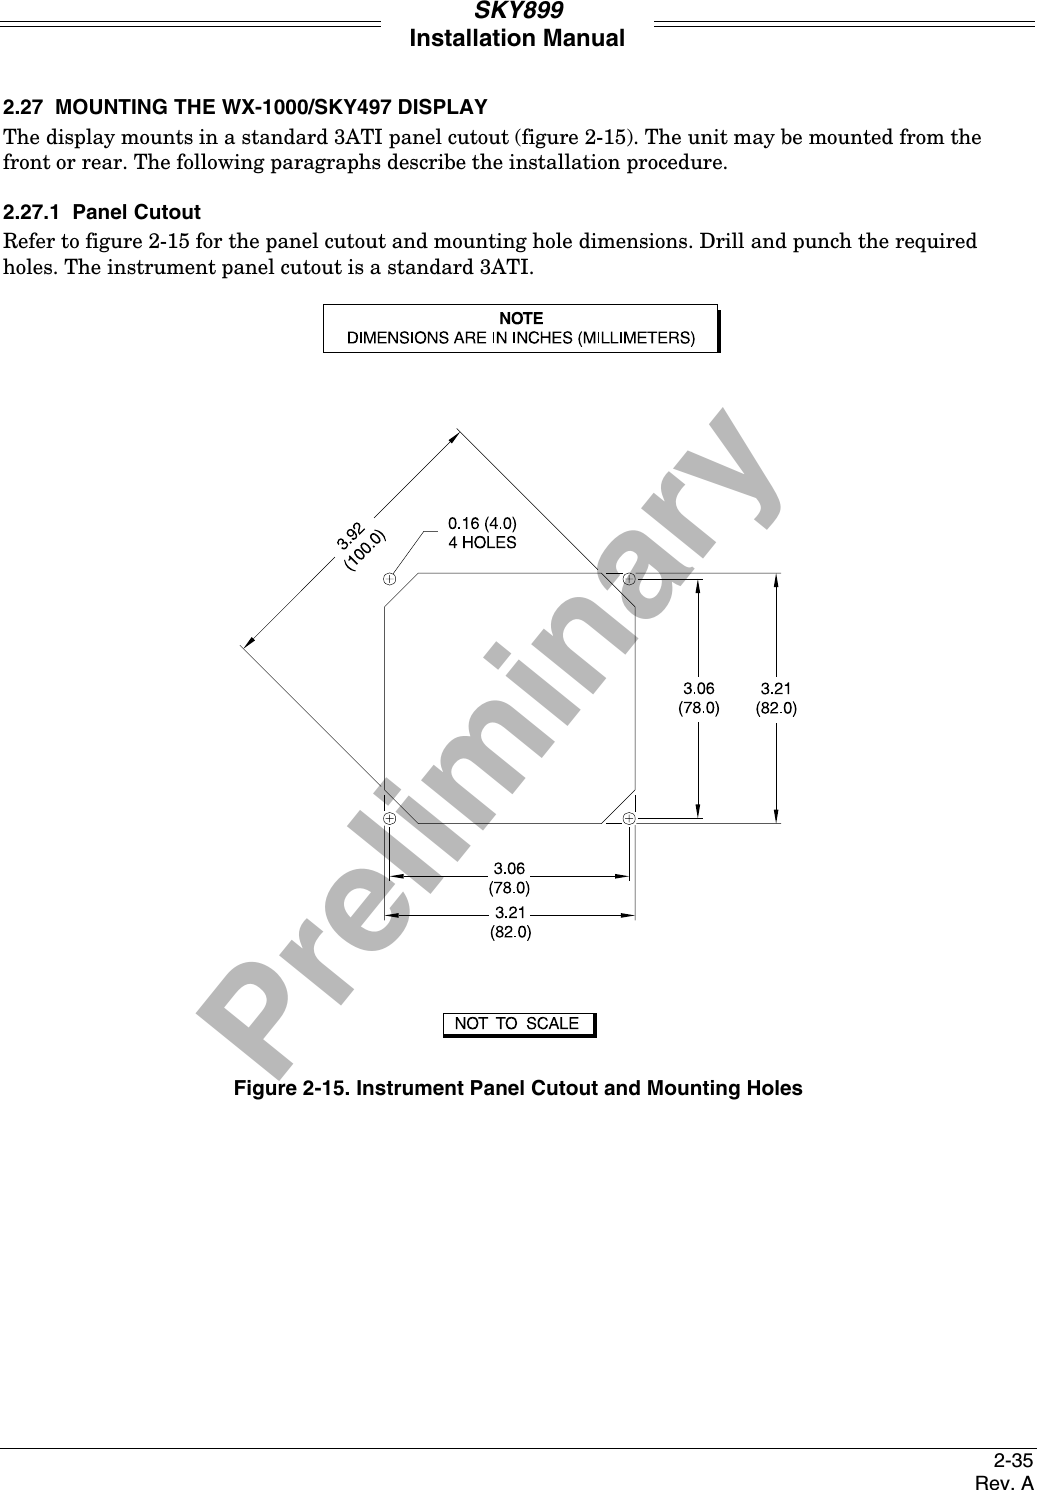 PreliminarySKY899Installation Manual2-35Rev. A2.27  MOUNTING THE WX-1000/SKY497 DISPLAYThe display mounts in a standard 3ATI panel cutout (figure 2-15). The unit may be mounted from thefront or rear. The following paragraphs describe the installation procedure.2.27.1  Panel CutoutRefer to figure 2-15 for the panel cutout and mounting hole dimensions. Drill and punch the requiredholes. The instrument panel cutout is a standard 3ATI.Figure 2-15. Instrument Panel Cutout and Mounting Holes